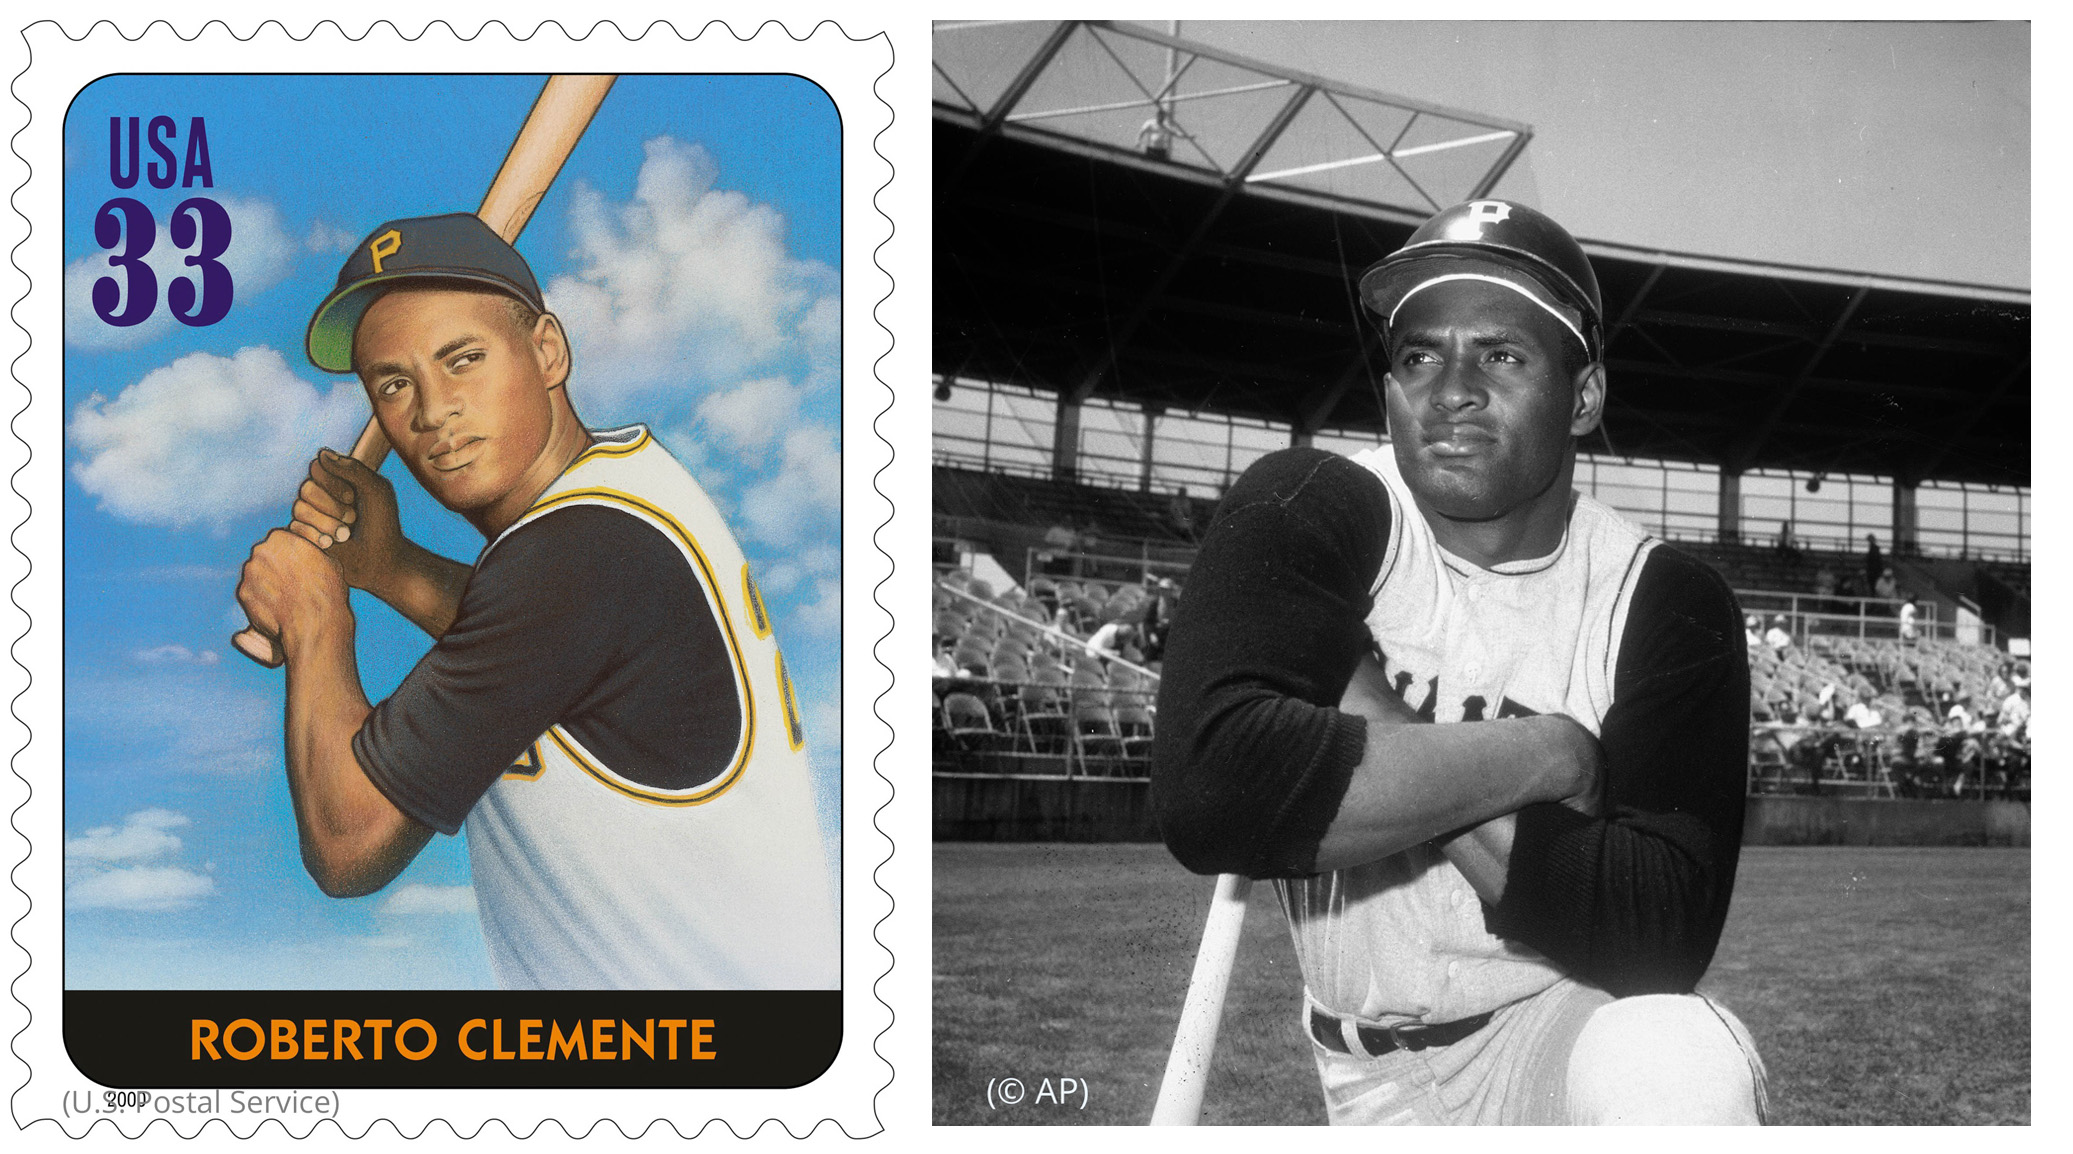 Left image: Roberto Clemente stamp (U.S. Postal Service) Right photo: Baseball player in stadium leaning on bat (© AP)